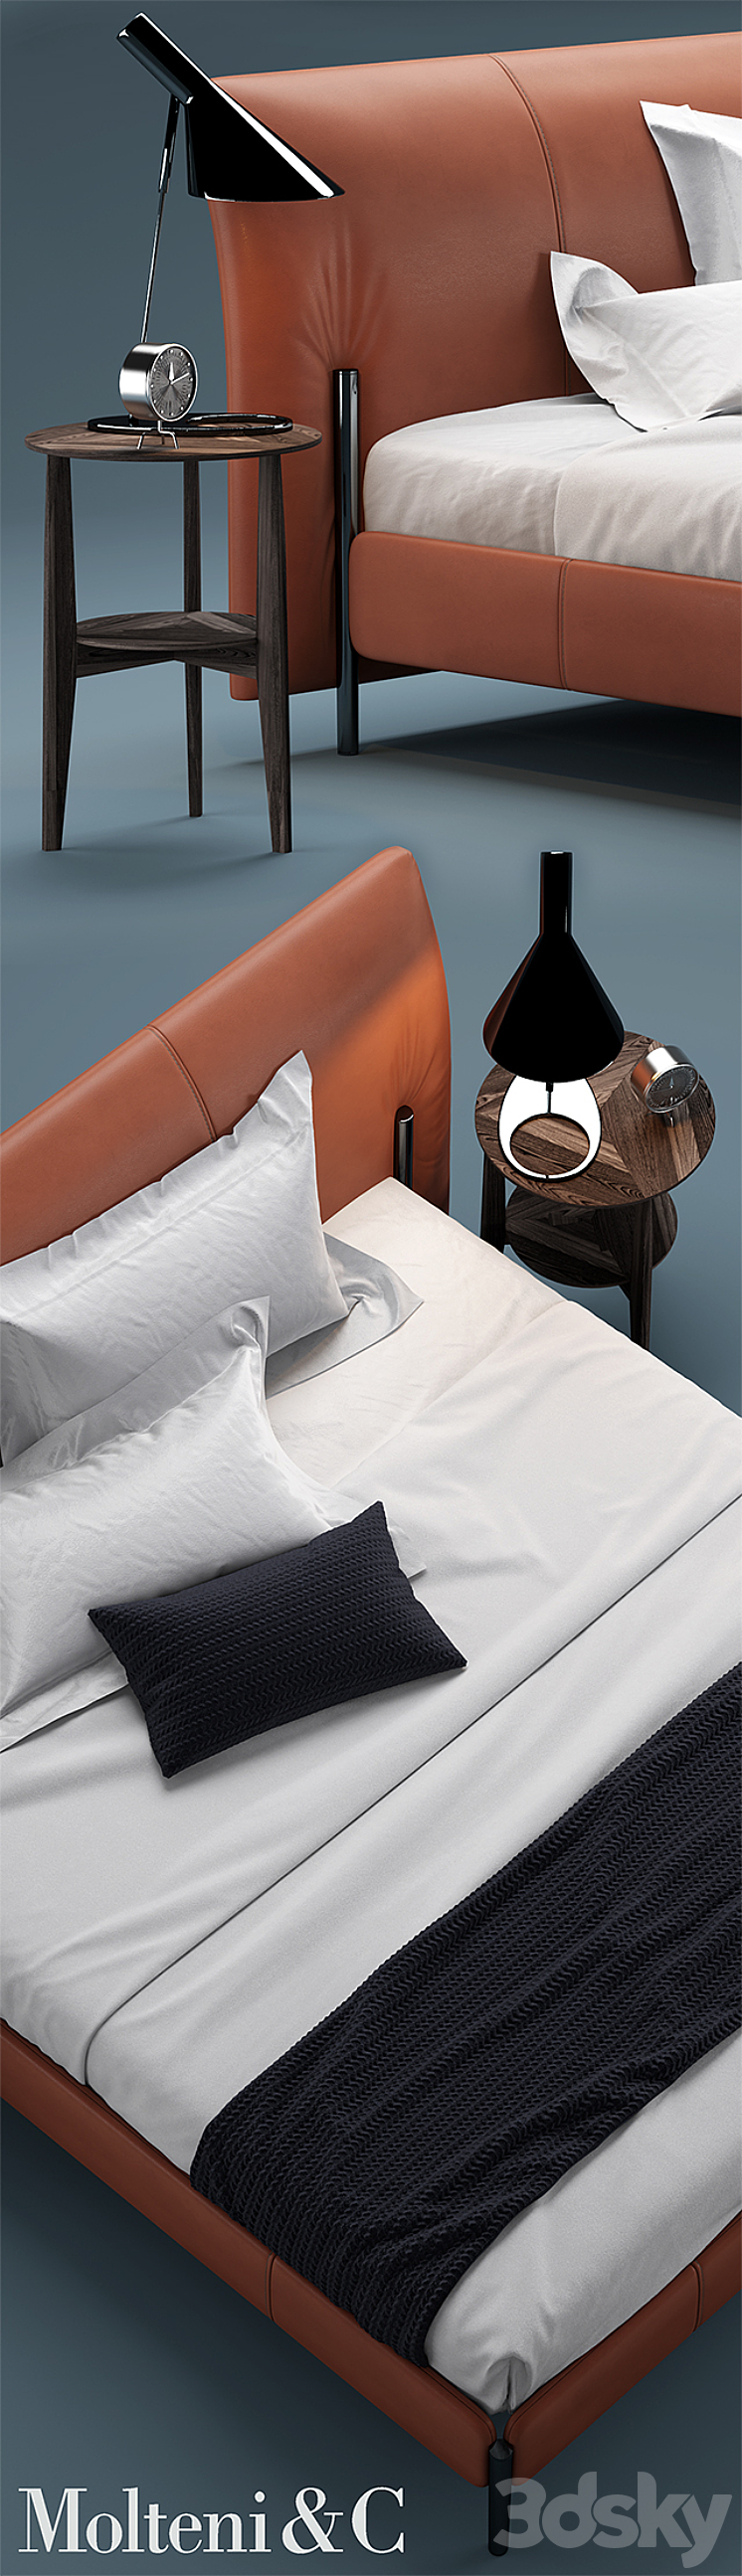 Bed molteni BEDS NICK 3DS Max - thumbnail 2